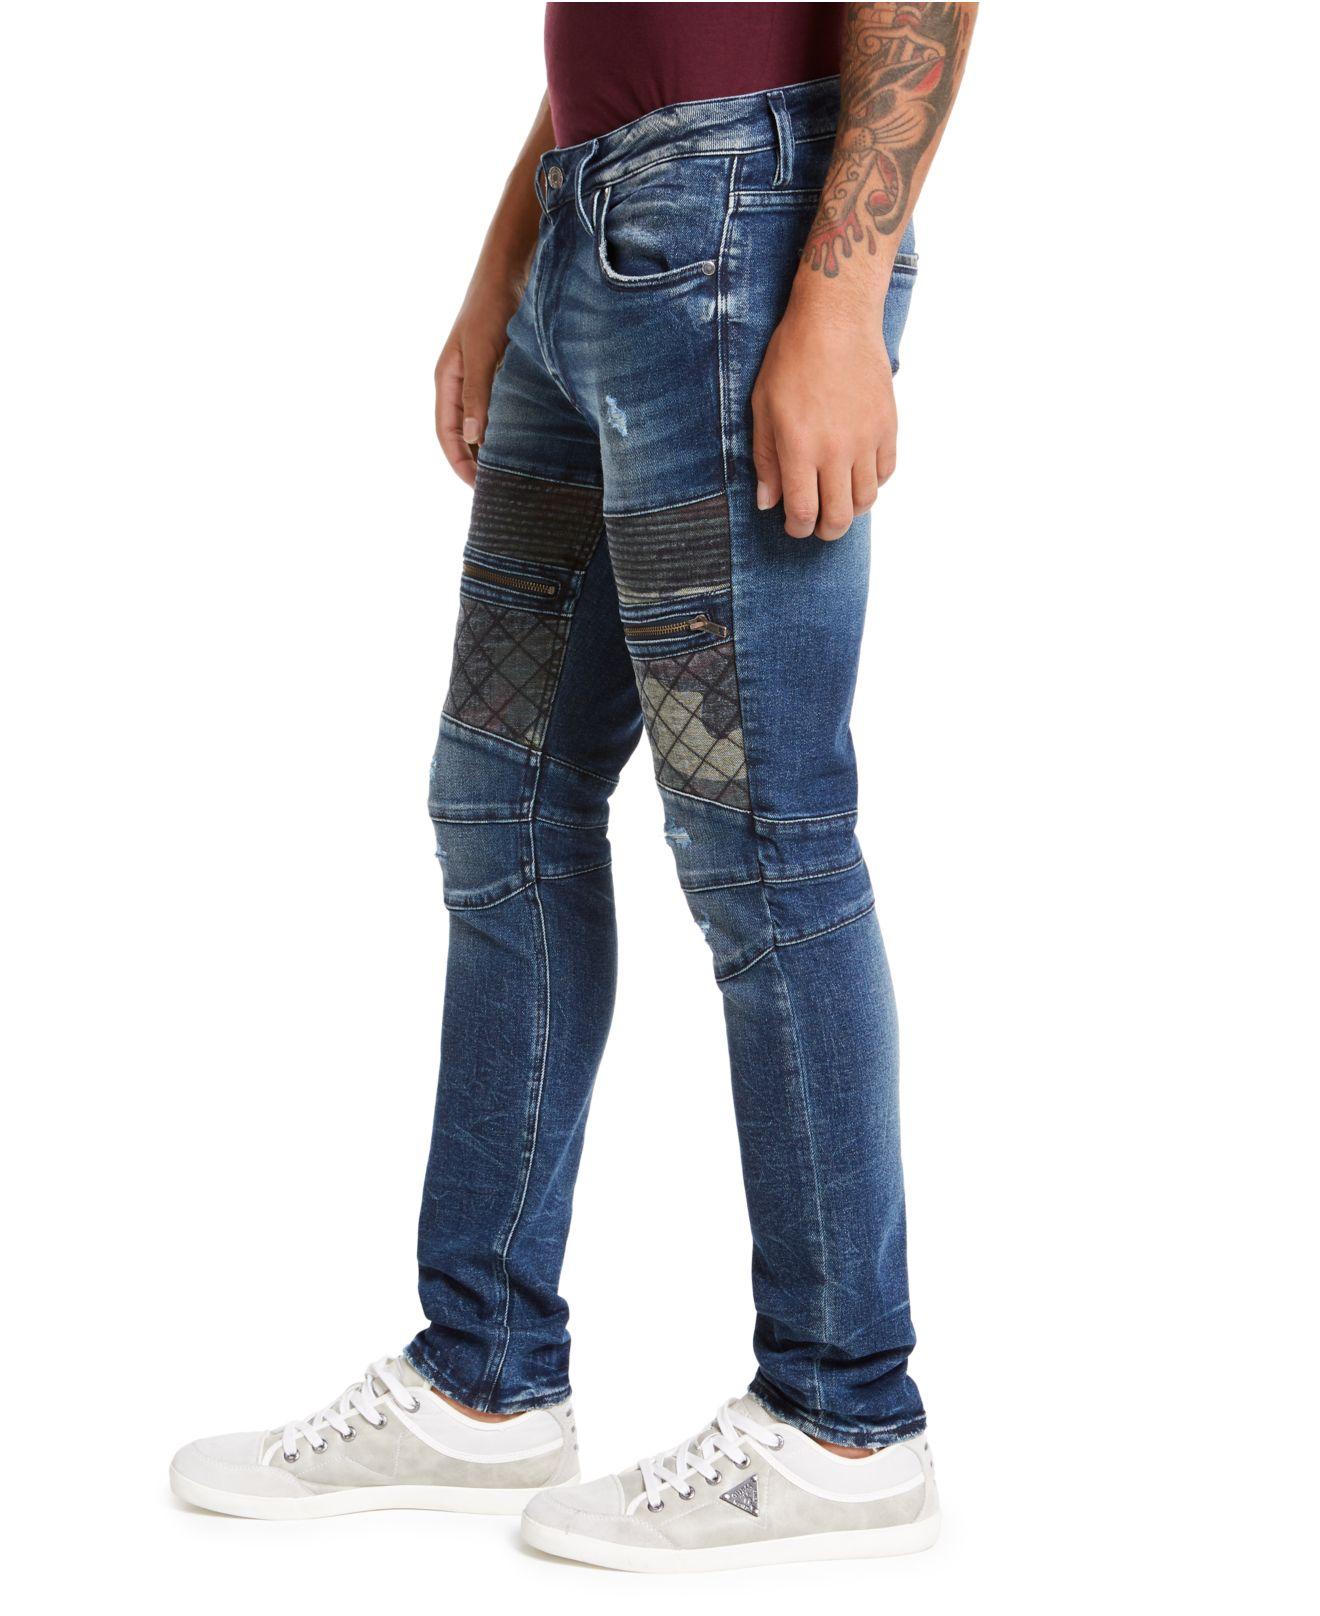 guess moto jeans Hot Sale - OFF 74%